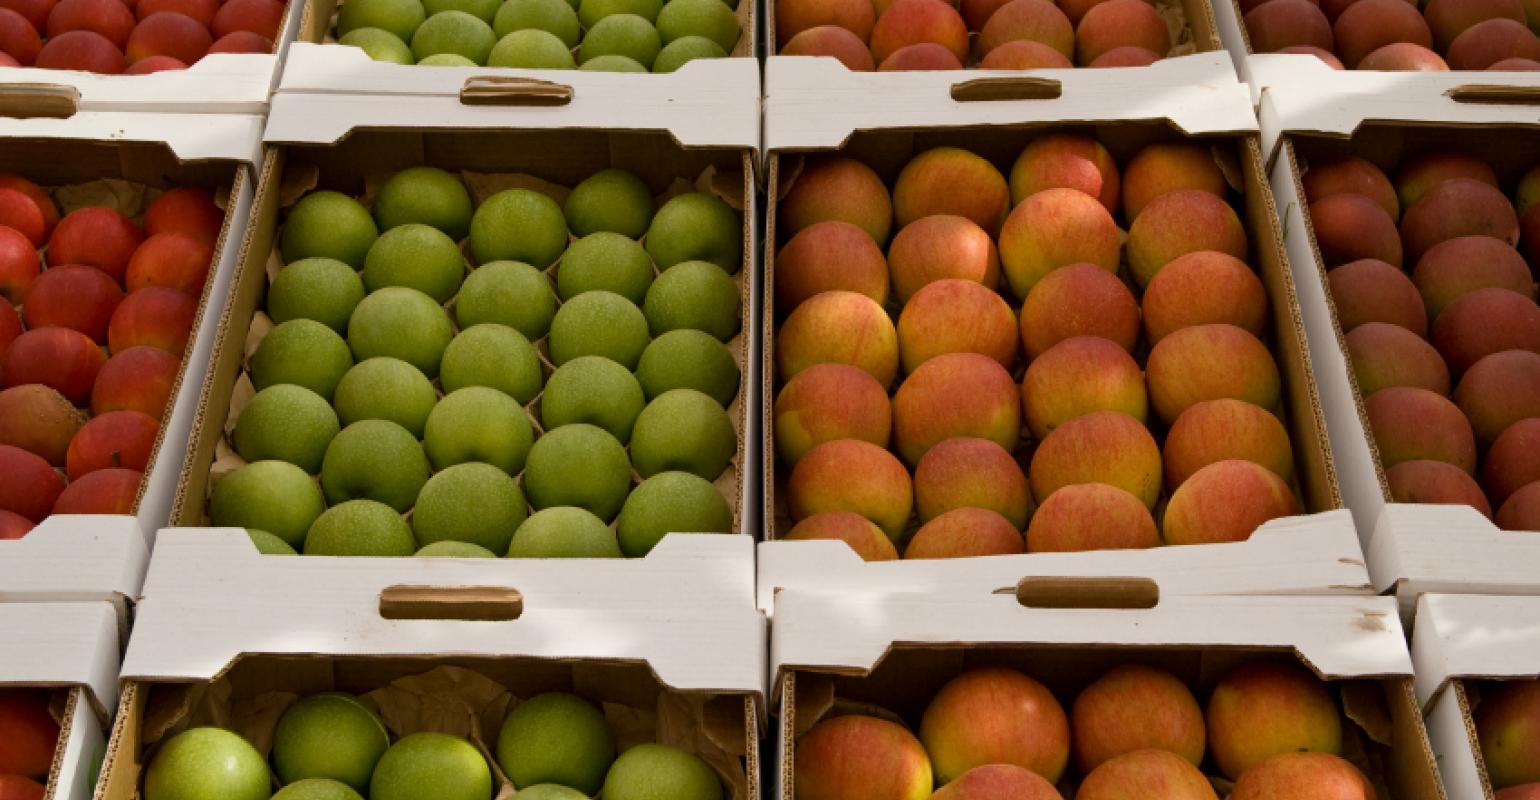 Sustainable Packaging: Greening Food Supply Chains